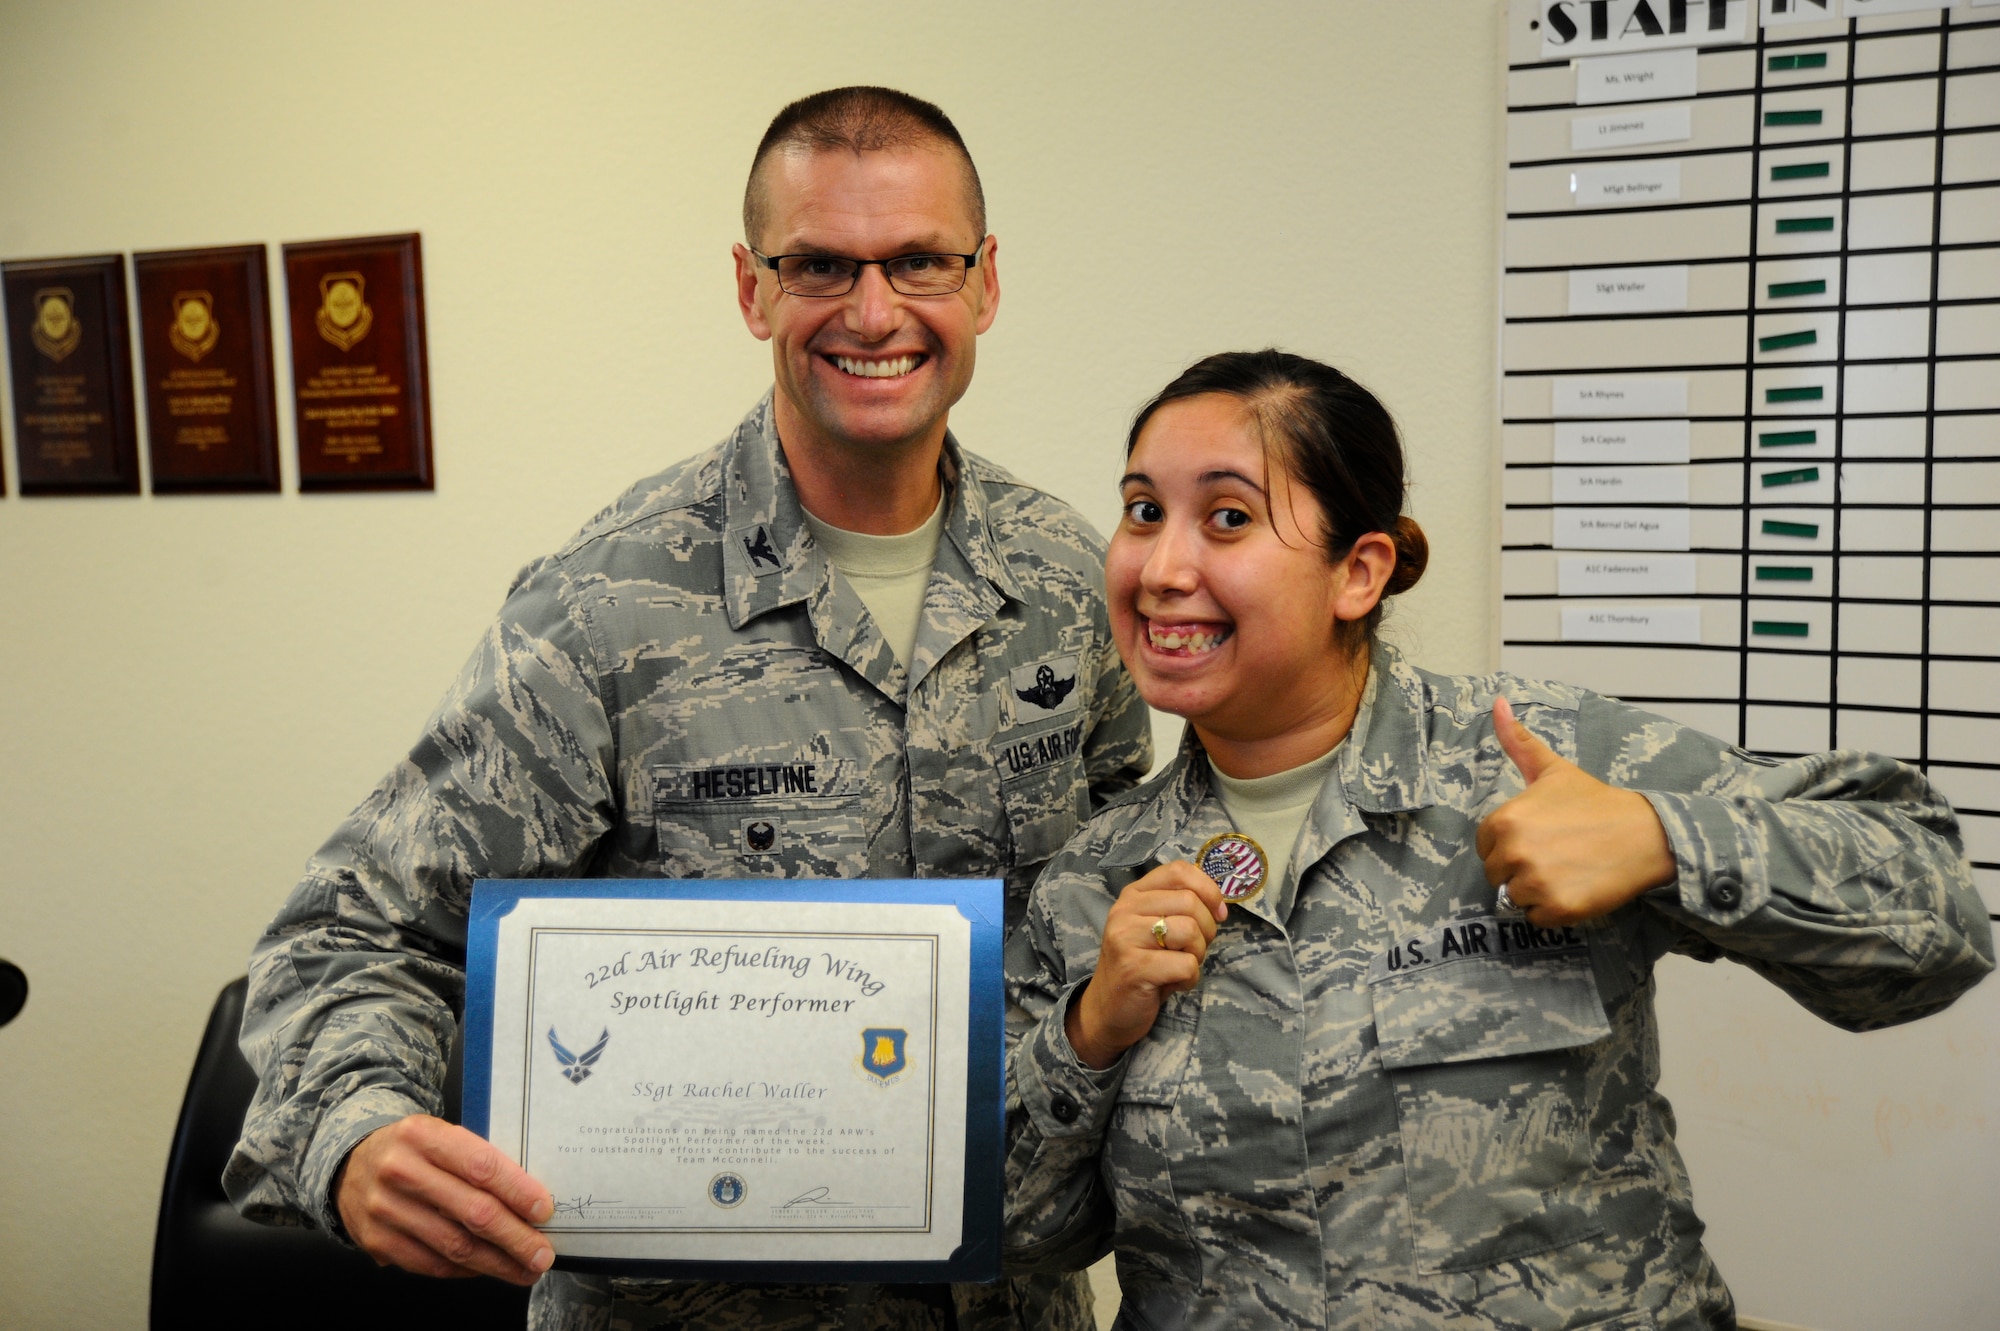 Staff Sgt. Rachel Waller, 22nd Air Refueling Wing Public Affairs command information NCO in charge, poses with Col. Phil Heseltine, 22nd Air Refueling Wing vice commander, Sept. 3, 2015, at McConnell Air Force Base, Kan. Waller was selected as the spotlight performer for the week of Aug. 23 – 29. (U.S. Air Force photo by Senior Airman Victor J. Caputo)